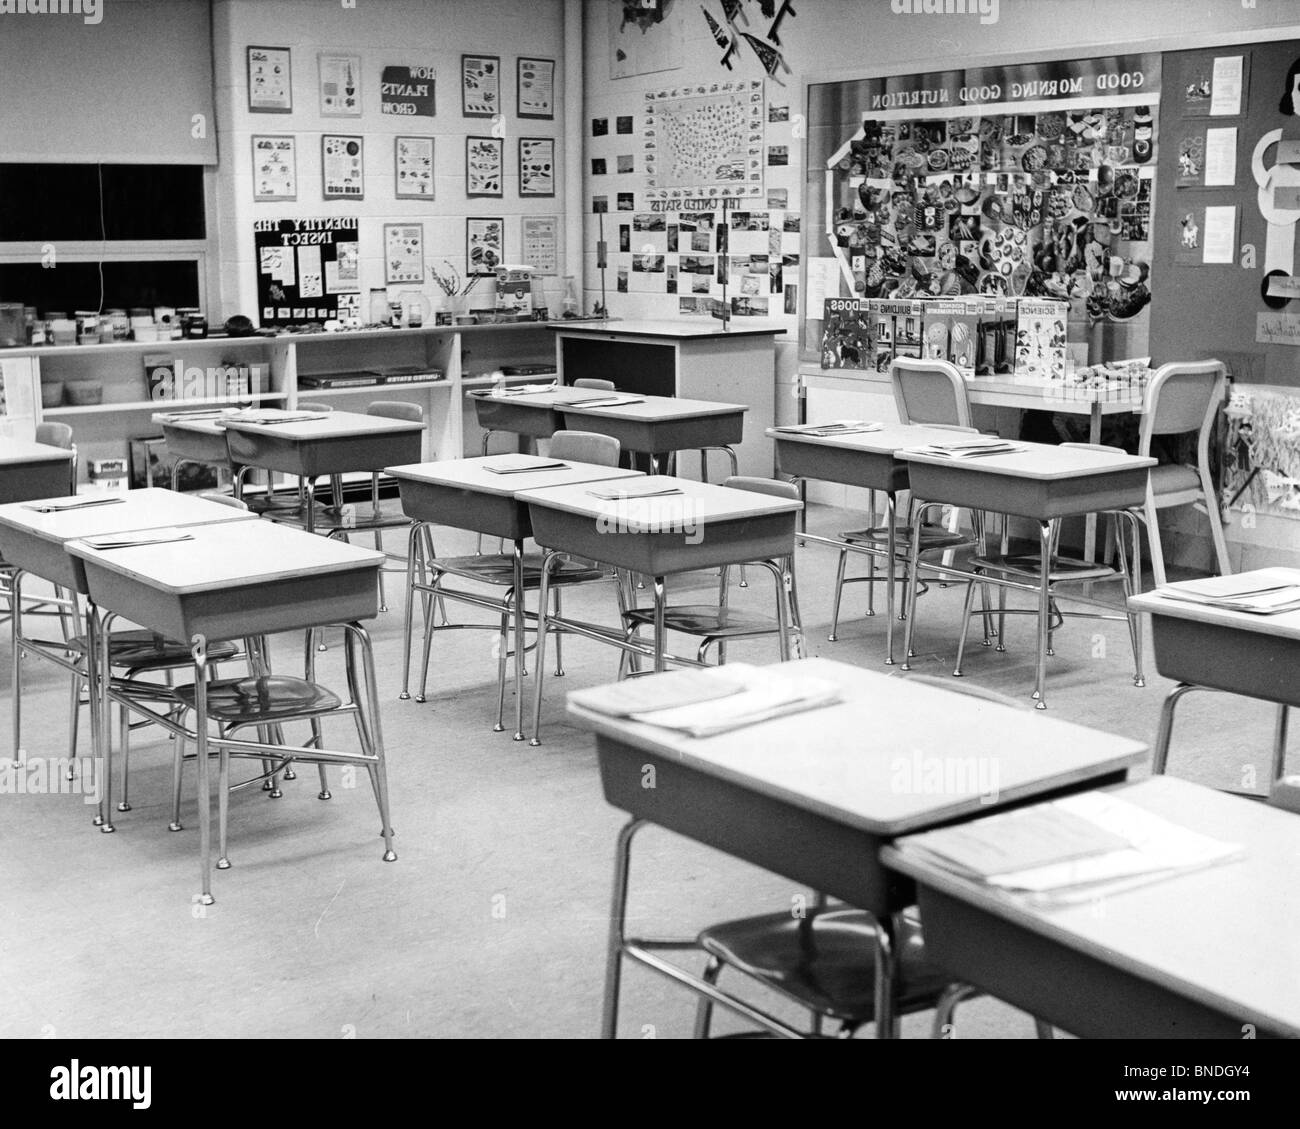 Empty chairs in a classroom Stock Photo